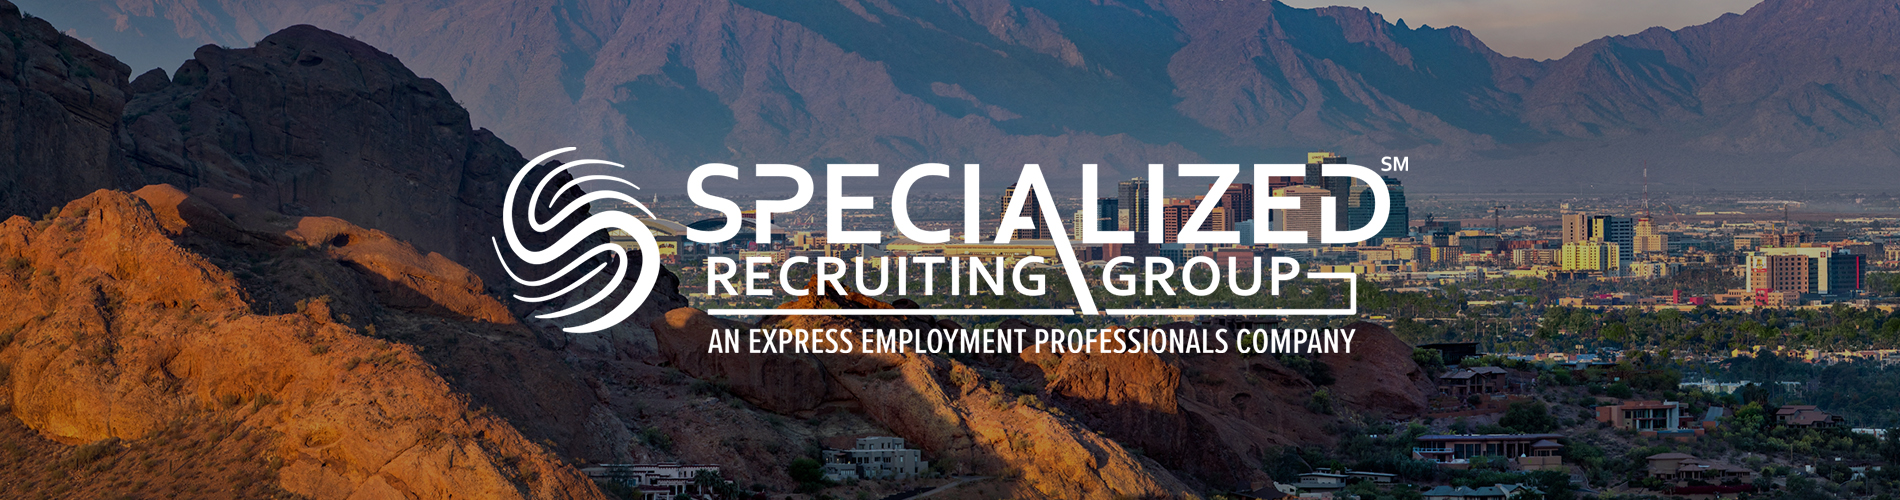 About Us, Specialized Recruiting Group of Phoenix, Arizona